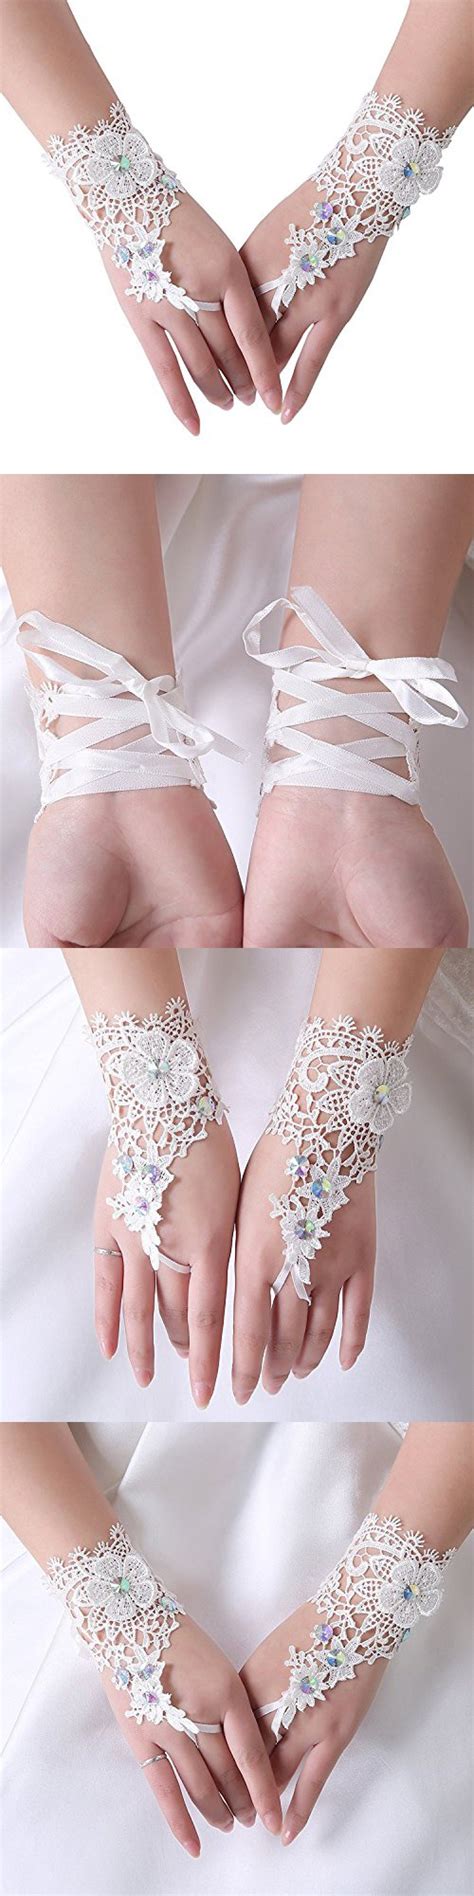 M Bridal Womens Lace Satin Fingerless Gloves For Wedding Party Brides